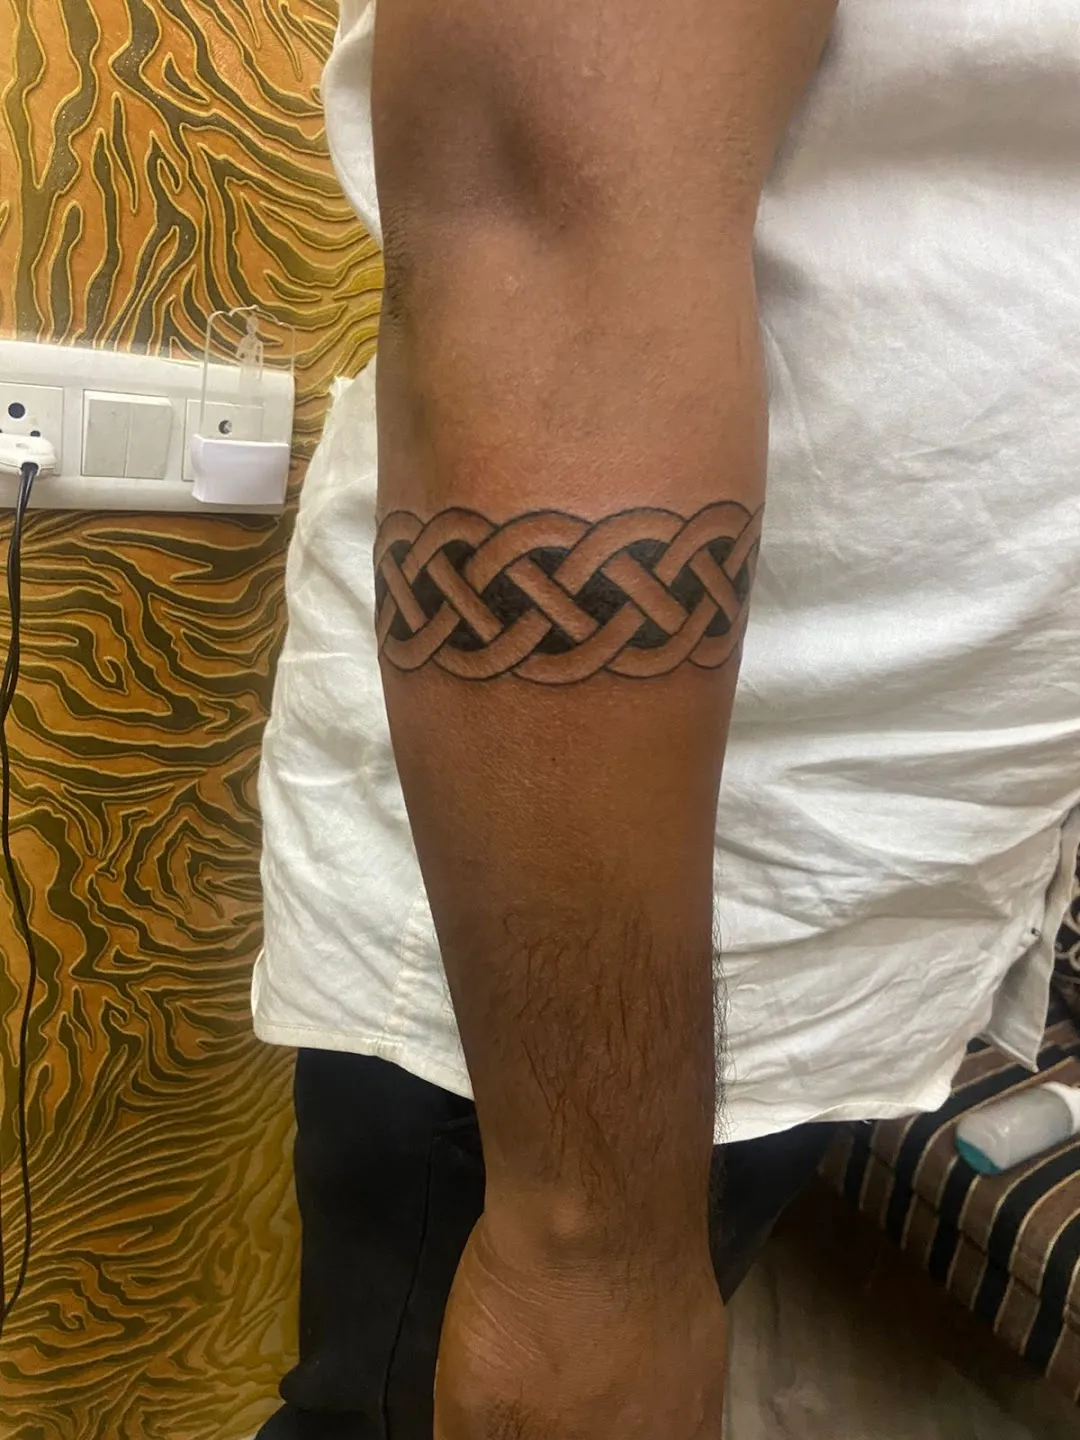 Lord Krishna with lord shiva  Forearm band tattoos Trishul tattoo  designs Band tattoo designs